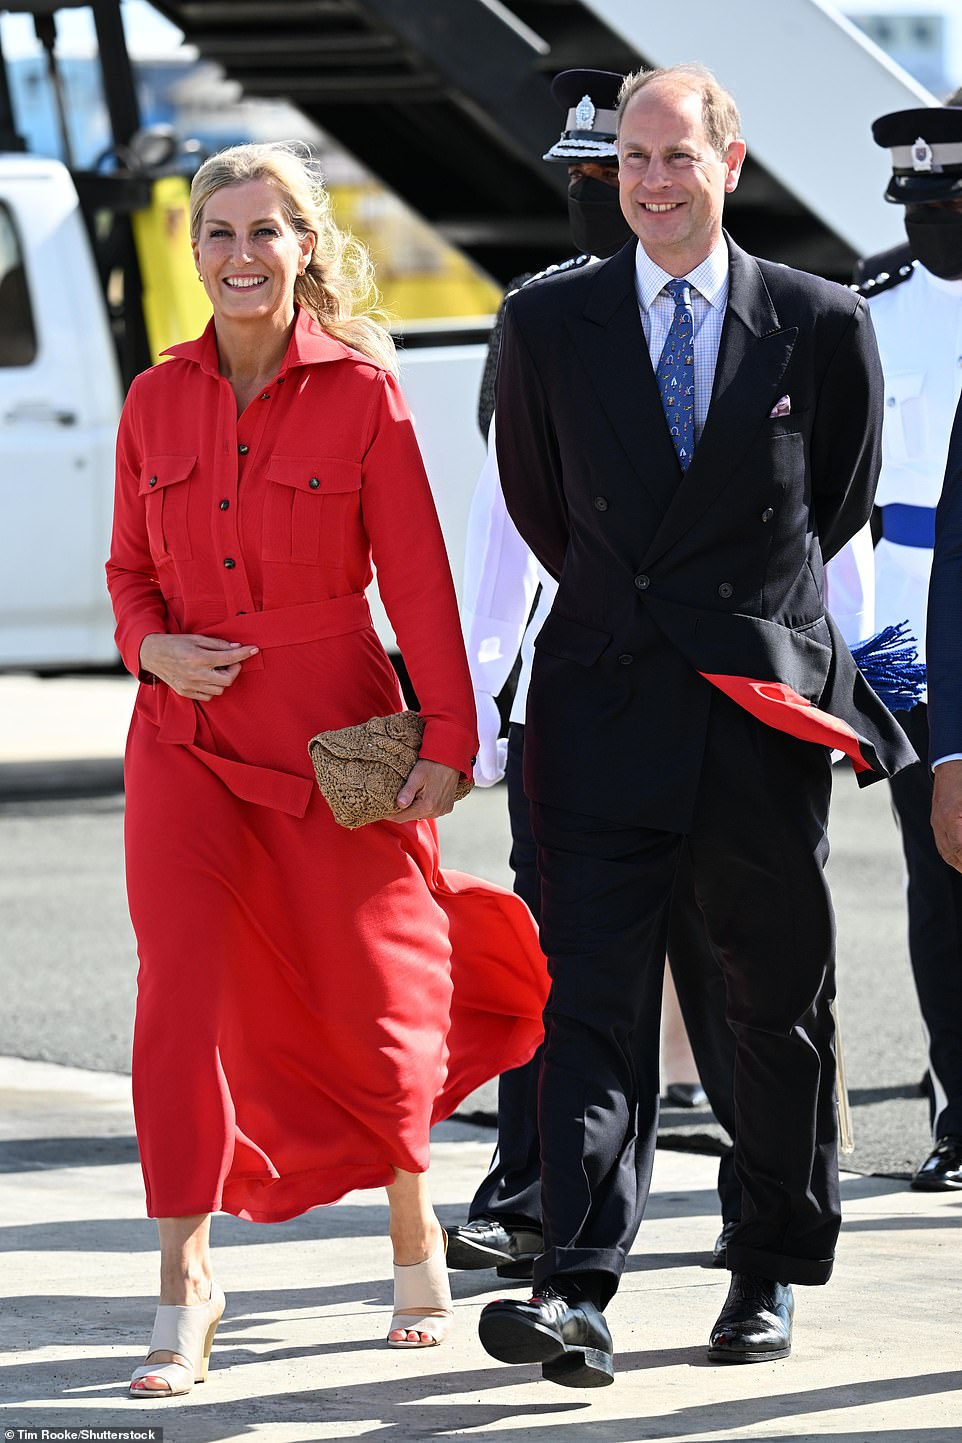 Prince Edward and Sophie Wessex, pictured here at Hewanorra International Airport, began their week-long tour of the Caribbean in St. Lucia on Friday